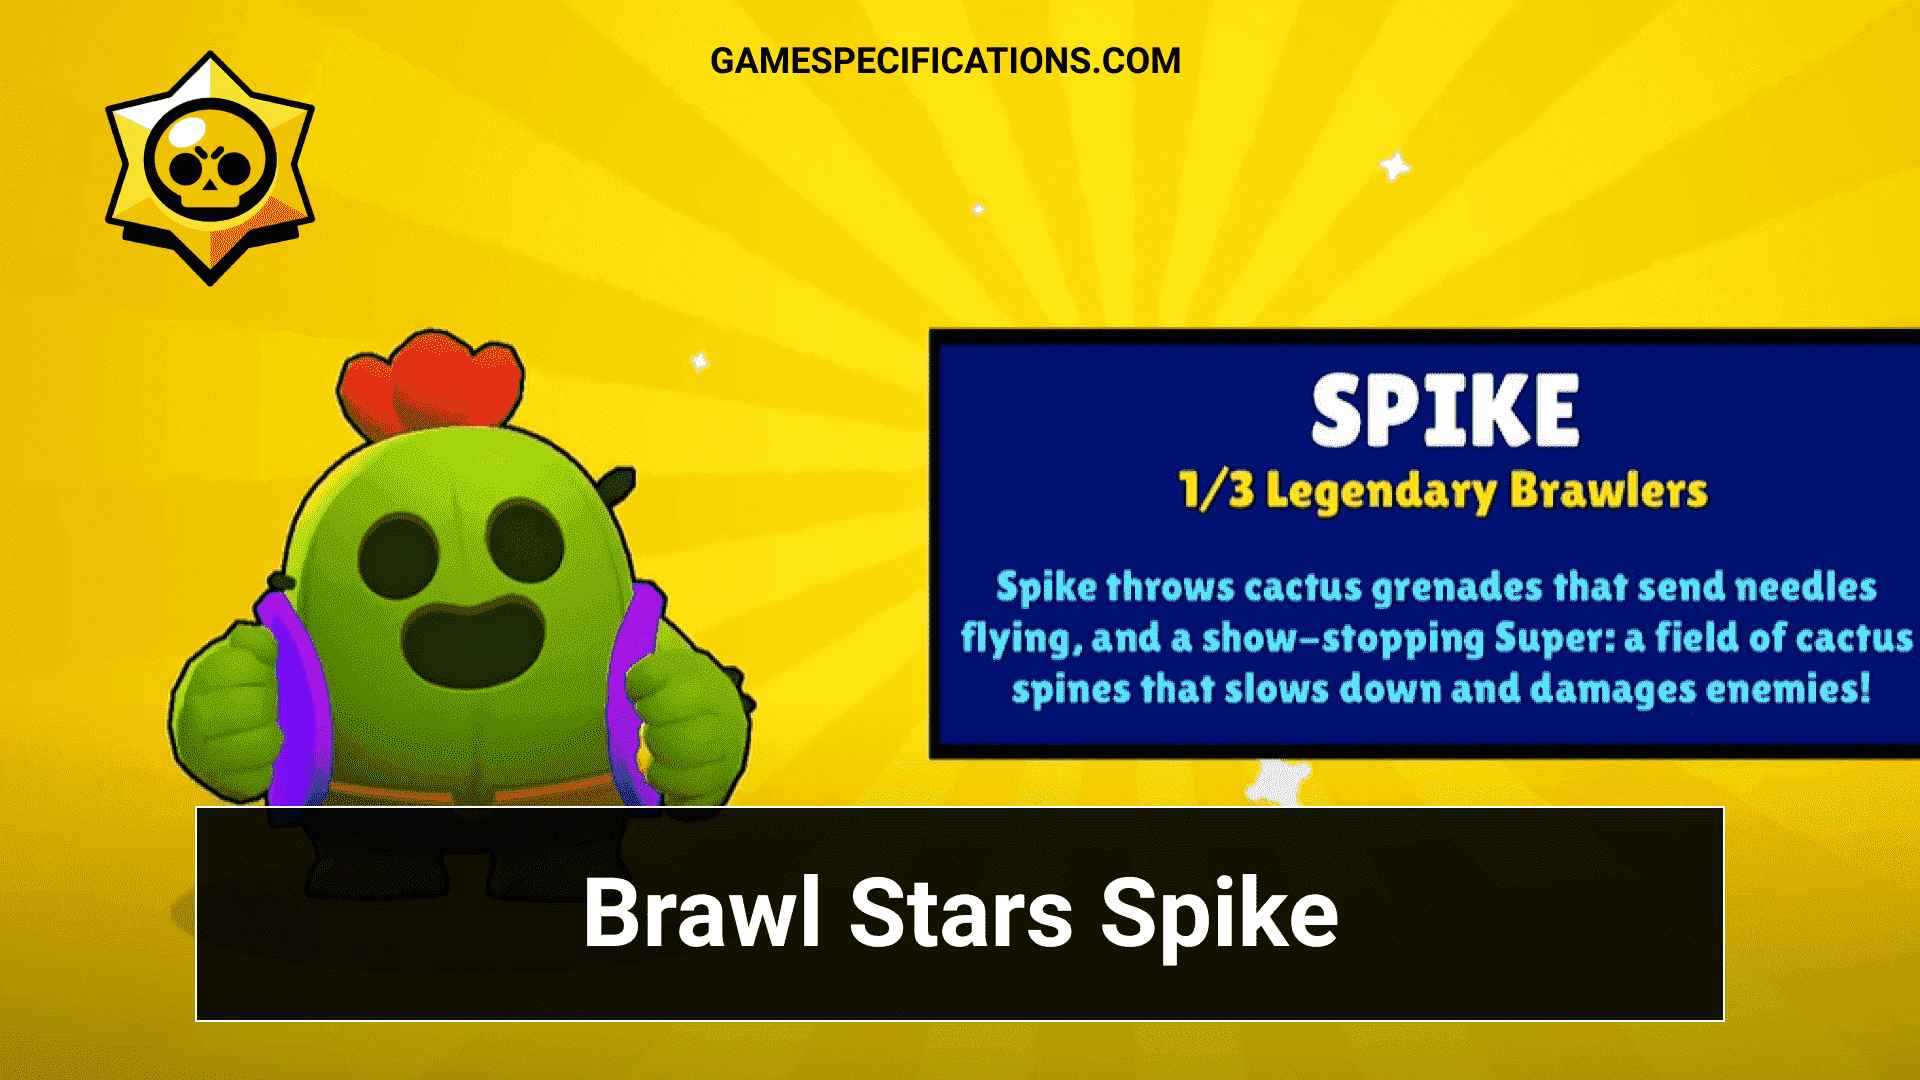 Brawl Stars Spike Introducing The Legendary Character In The Game Game Specifications - brawl stars how to unlock pam